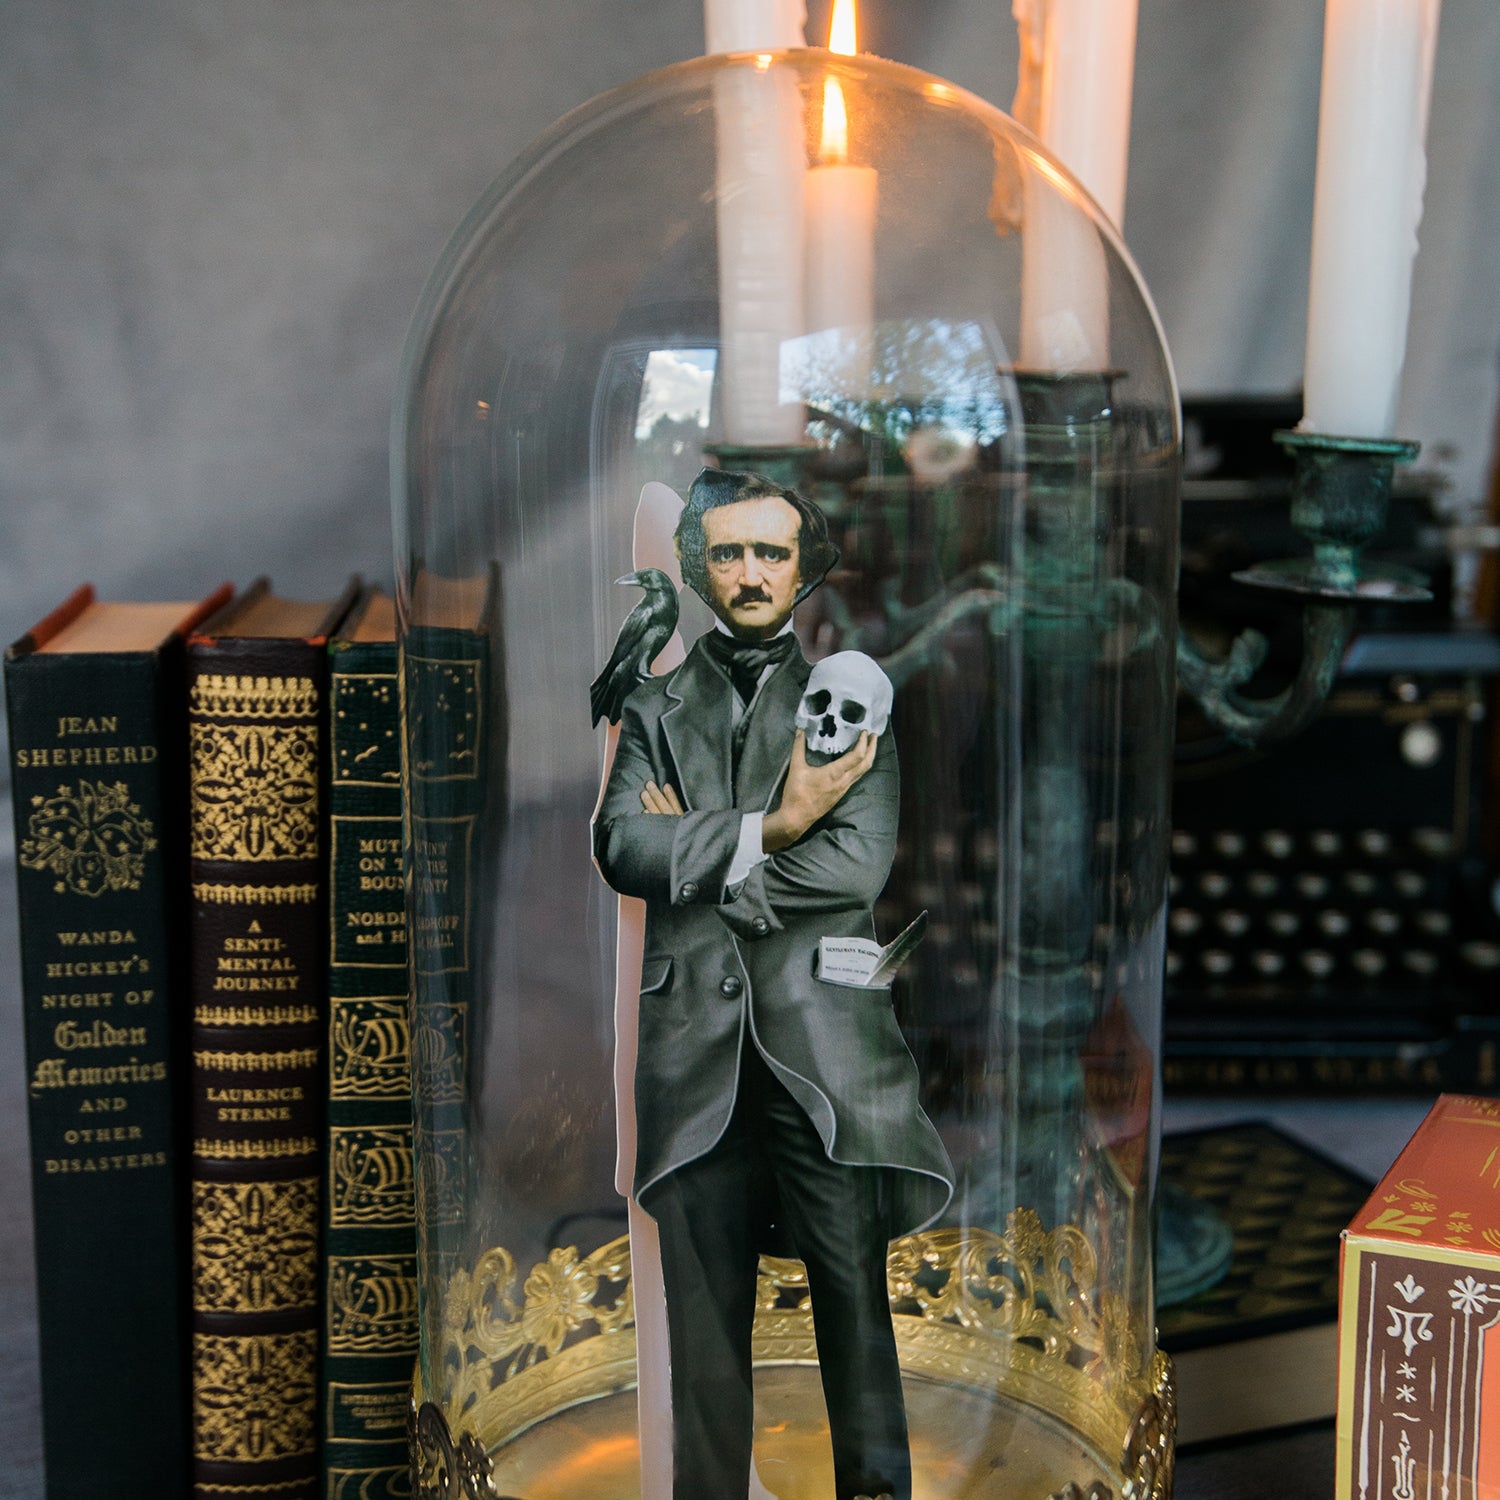 Edgar Allan Poe Unique Gifts For Book Lover My Weekend is Booked